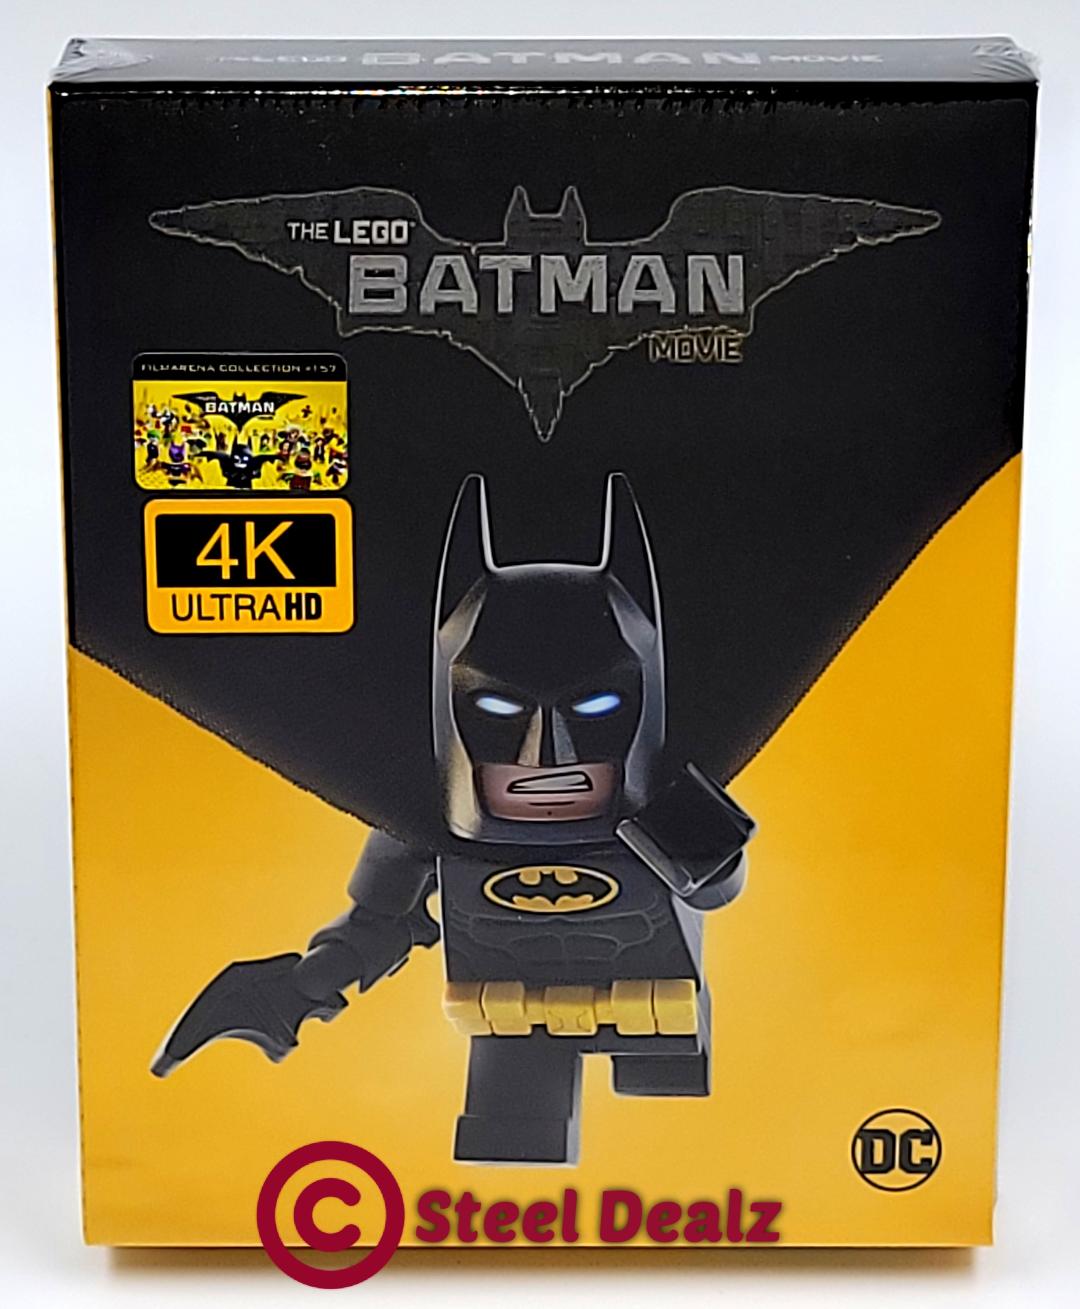 Bricks Big LEGO Pack Batman Movie DVD + The Lego Special Edition Movie +  Second Part 2 Disc Triple Feature 3 Pack